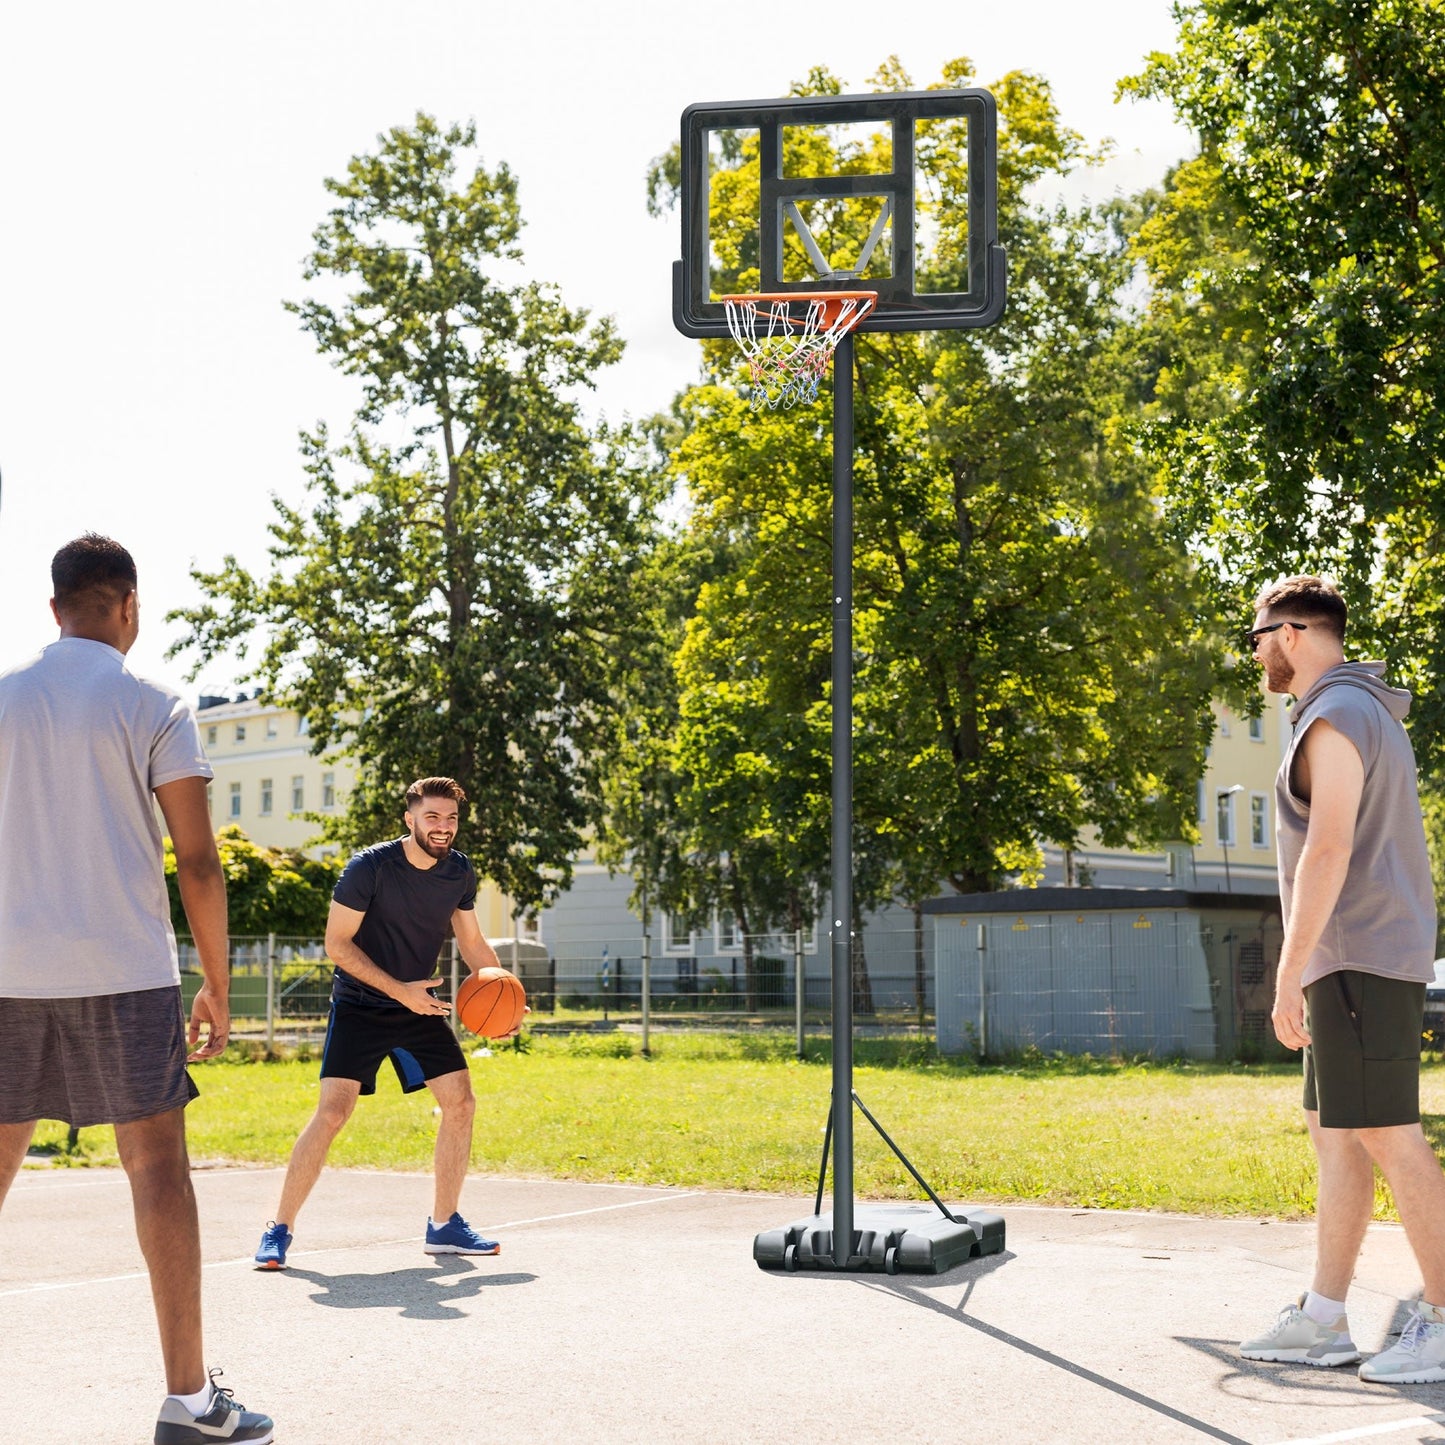 -Soozier Portable Basketball Stand 7.6ft-10ft Adjustable Basketball Hoop Backboard with Wheels & 43Inch Backboard, Pool Basketball Hoop - Outdoor Style Company